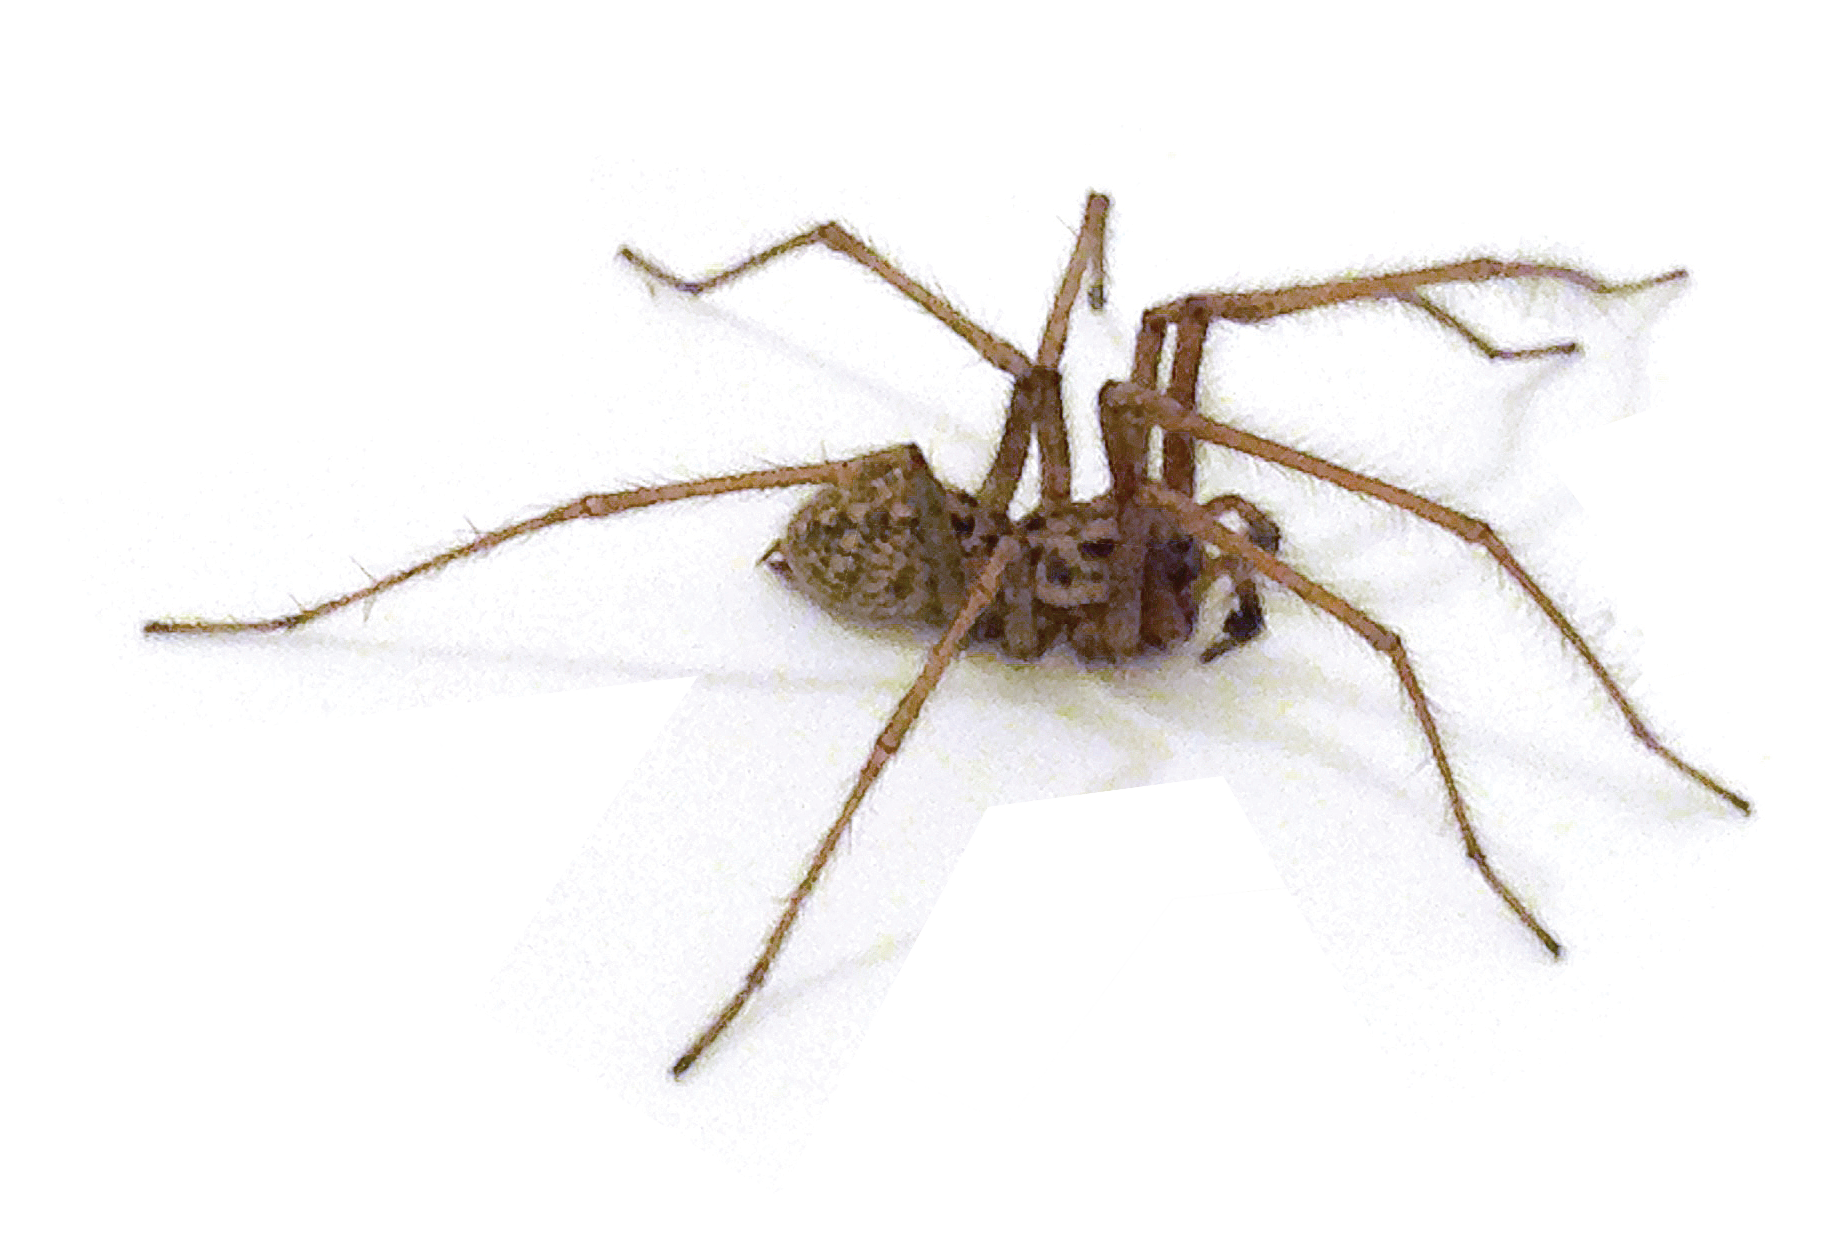 An image of a spider